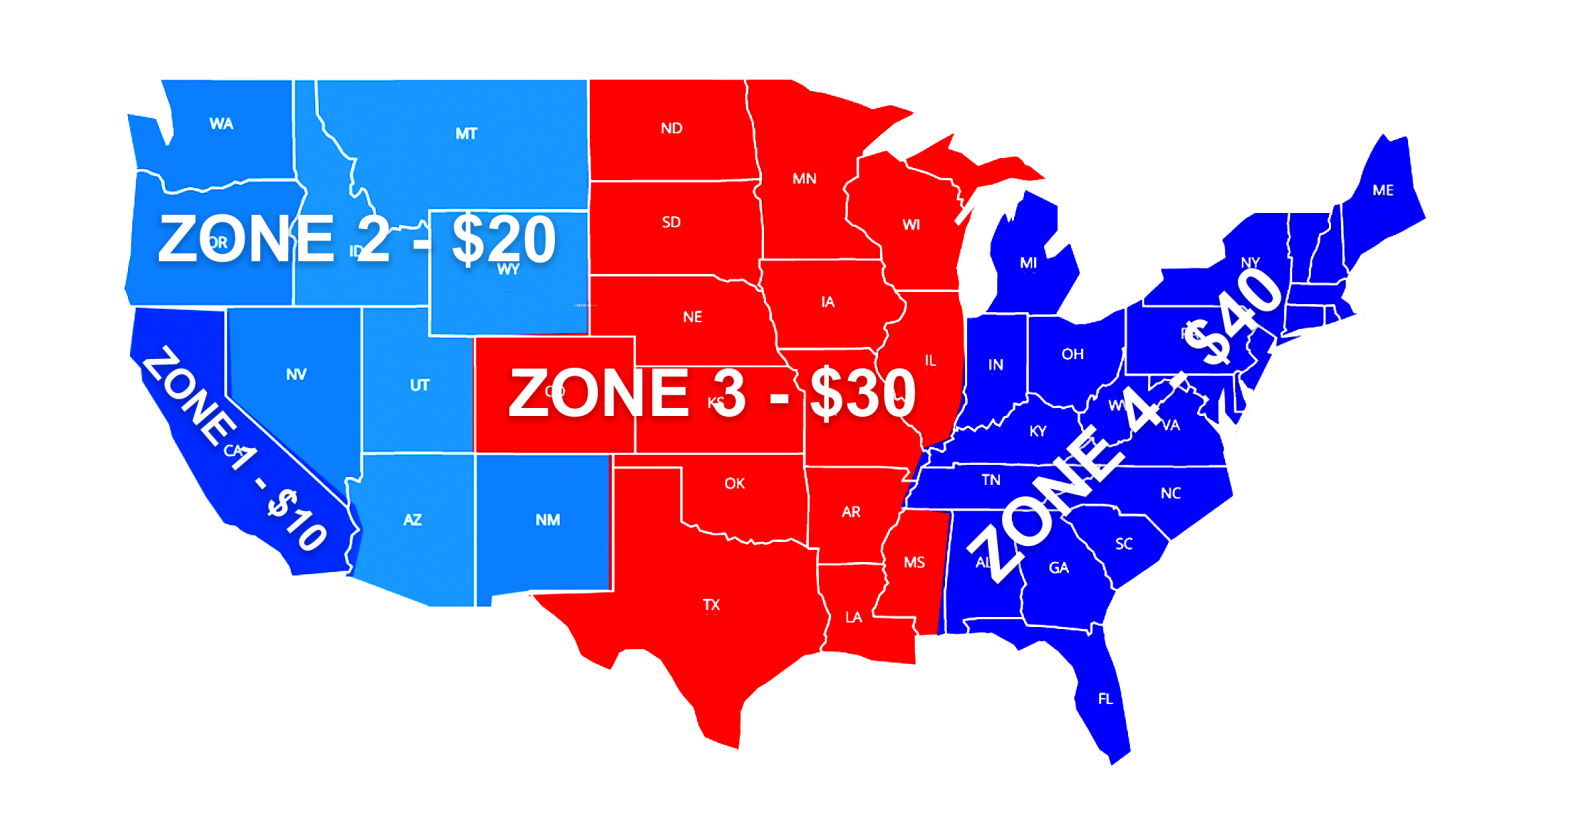 Zones Map and Shipping Rates: Zone 1: California $10, Zone 2: West Coast $20, Zone 3: Central $30, Zone 4: East Coast $40